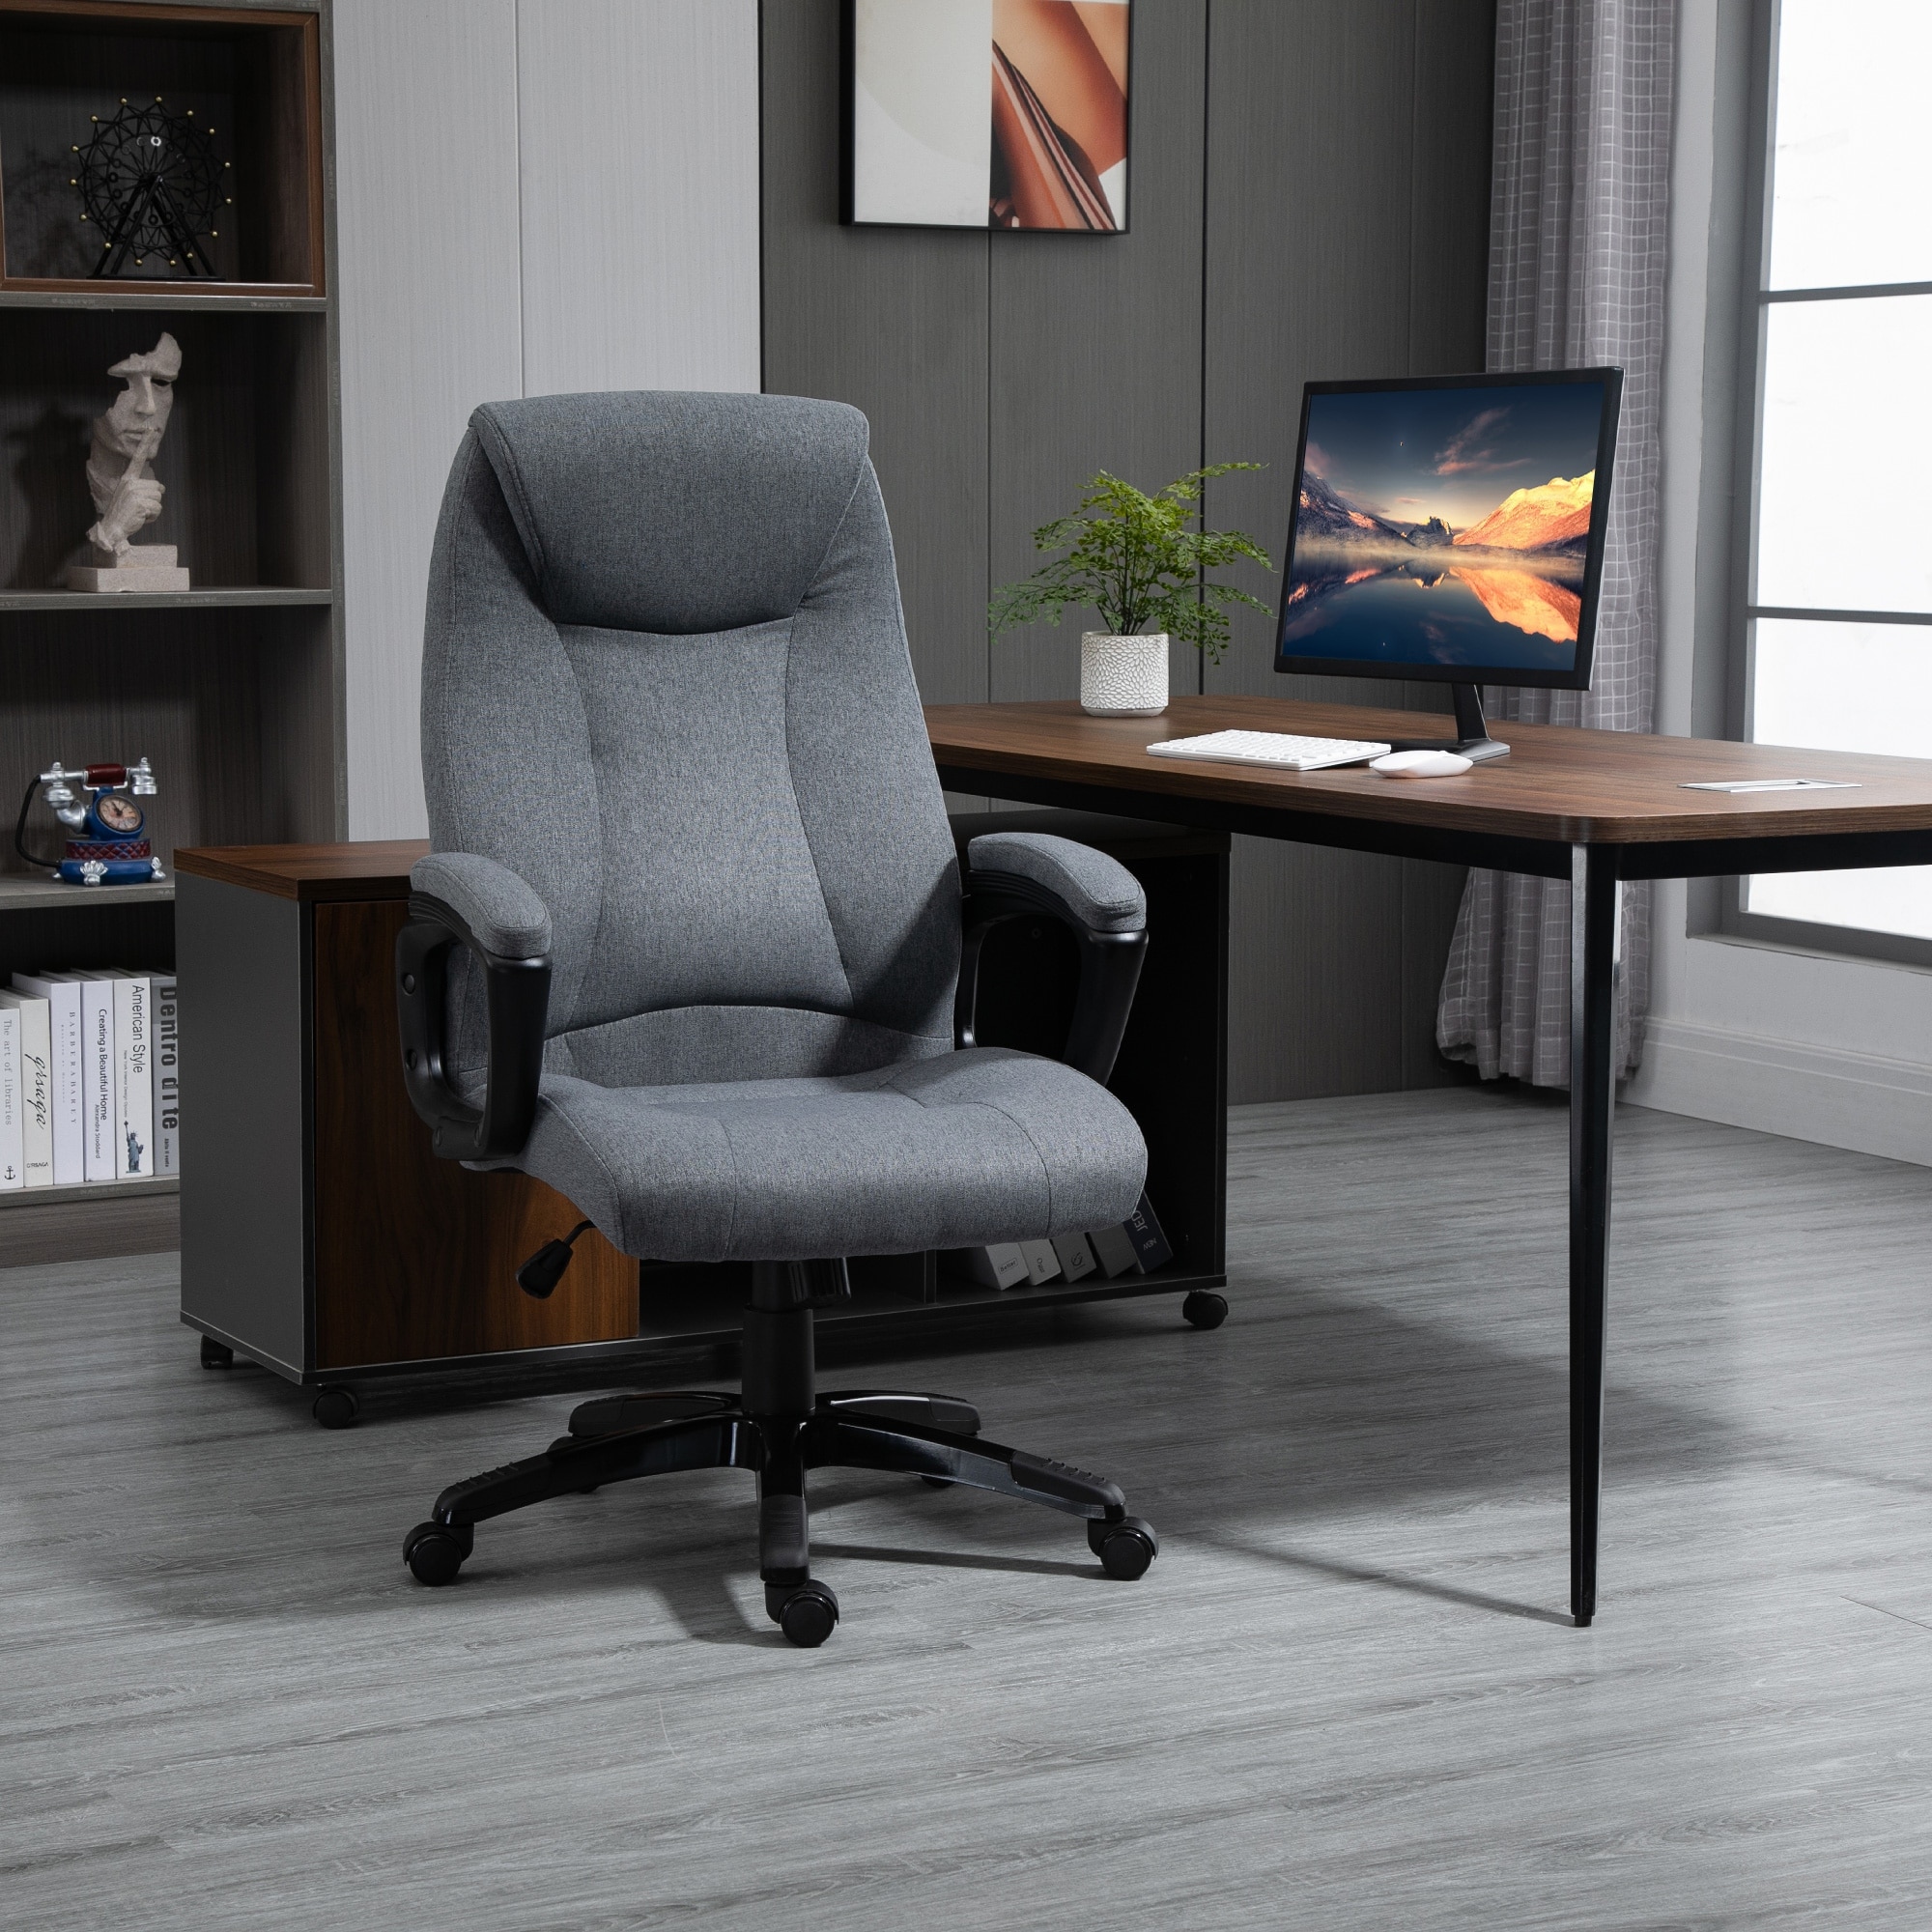 https://ak1.ostkcdn.com/images/products/is/images/direct/5e8373e8239692c895ad0407351009c5b4567cf4/Vinsetto-Ergonomic-Office-Chair-Adjustable-Height-Linen-Fabric-Rocker-360-Swivel-Task-Seat%2C-Grey.jpg